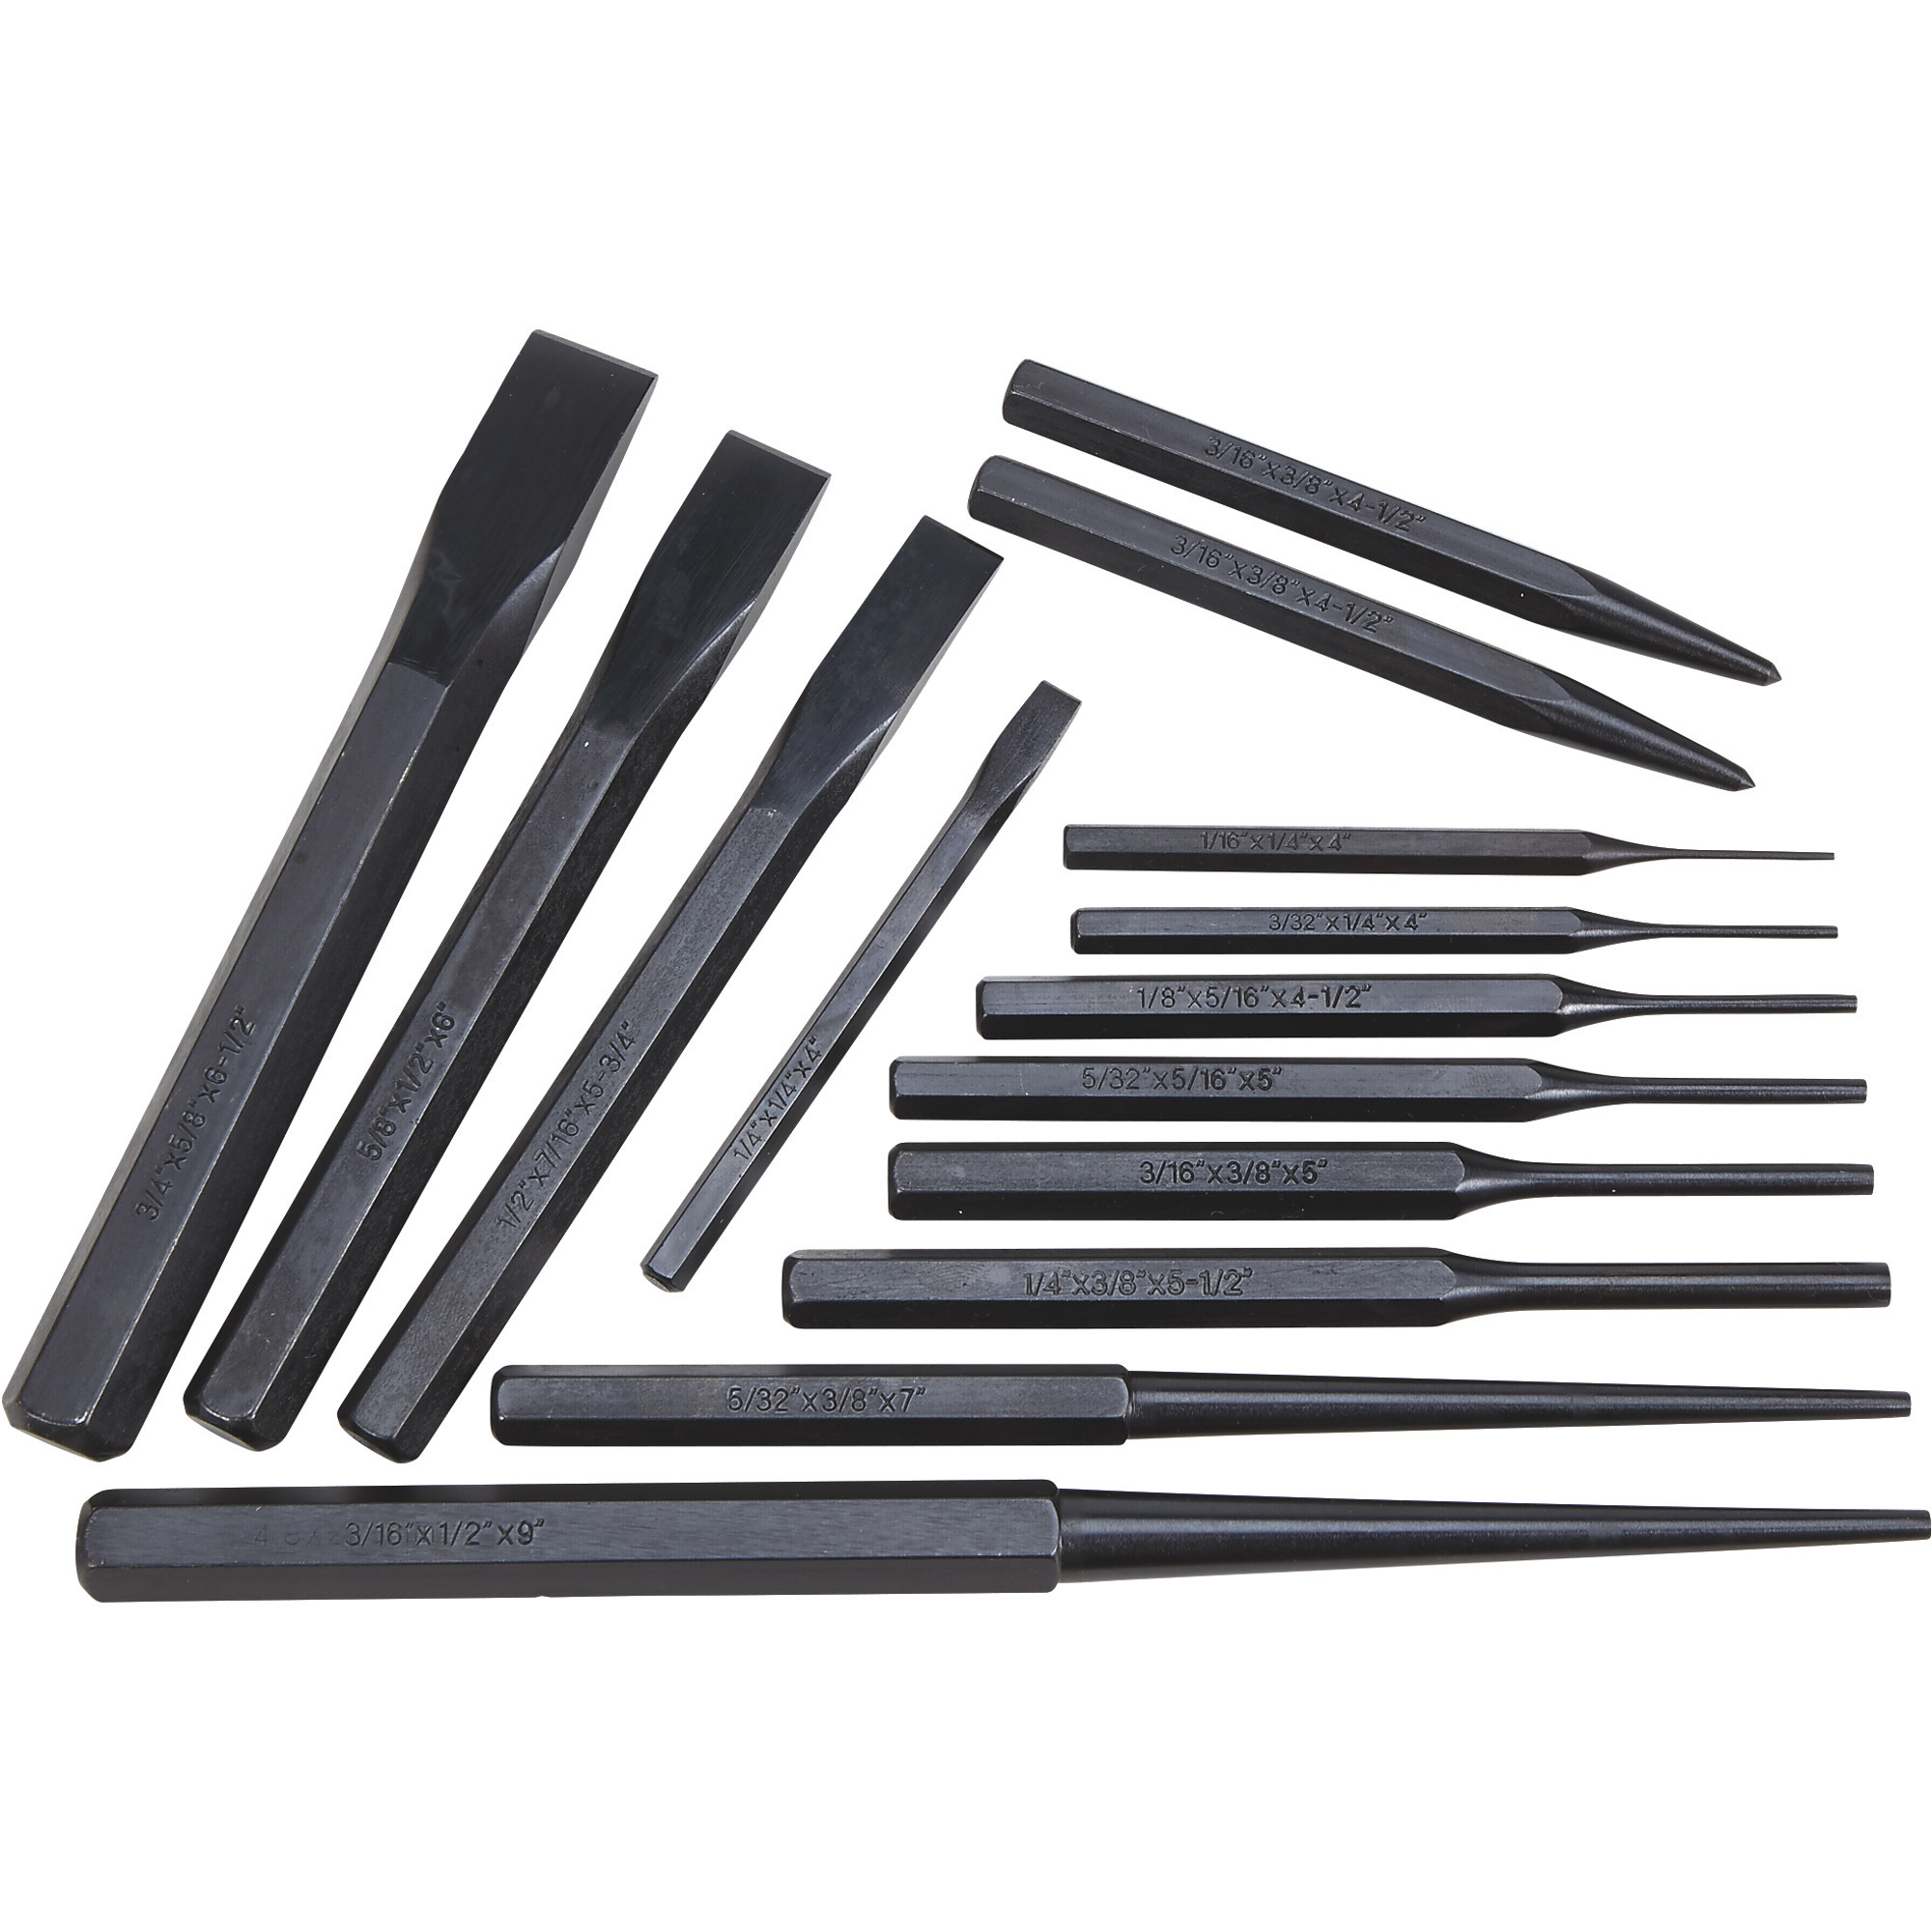 Northern Industrial Tools Wood Chisel Set — 5 Piece